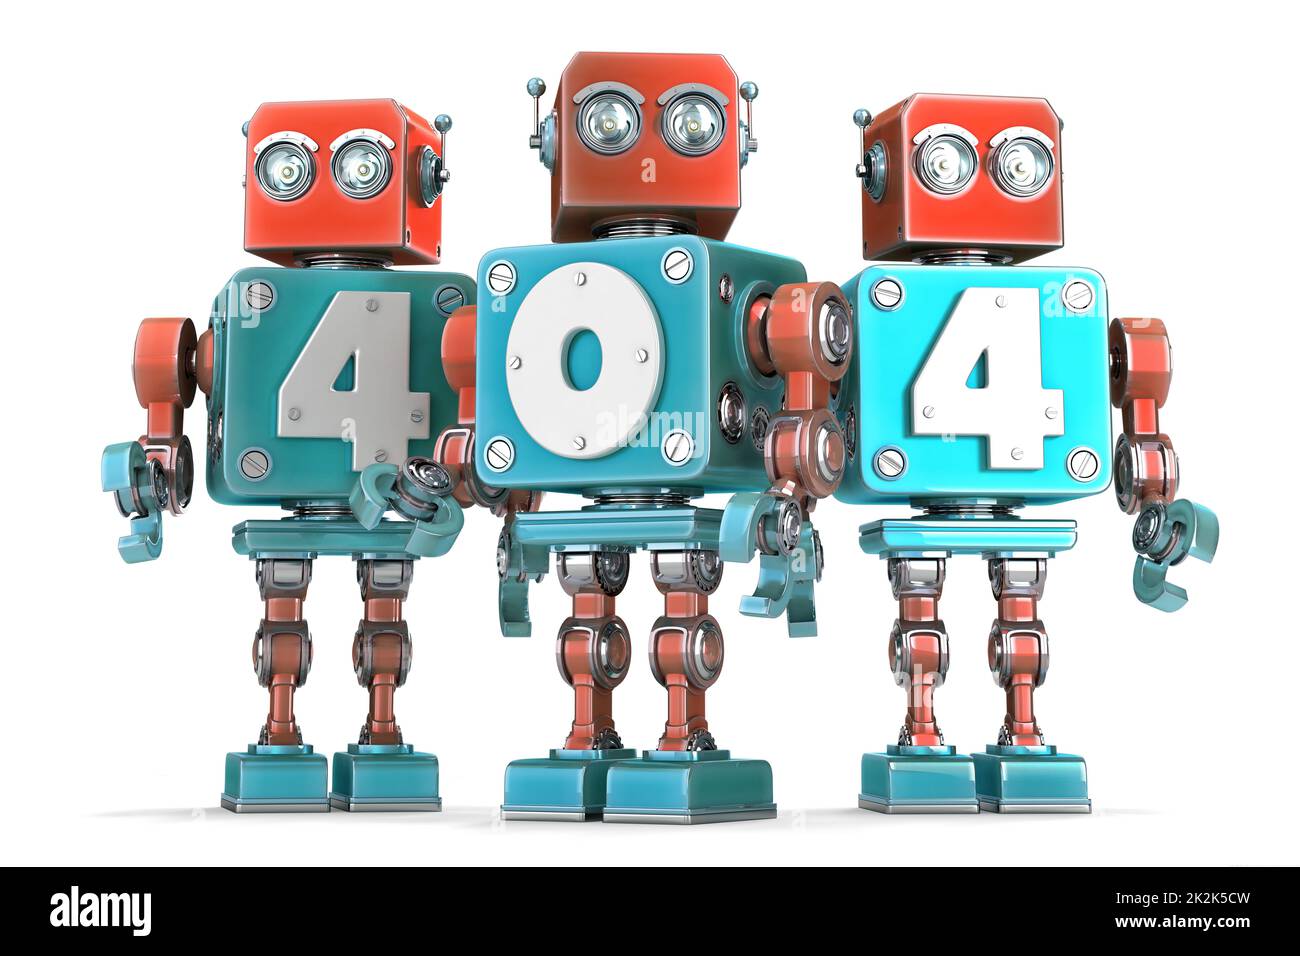 Group of vintage robots with 404 sign. Isolated. Contains clipping path Stock Photo